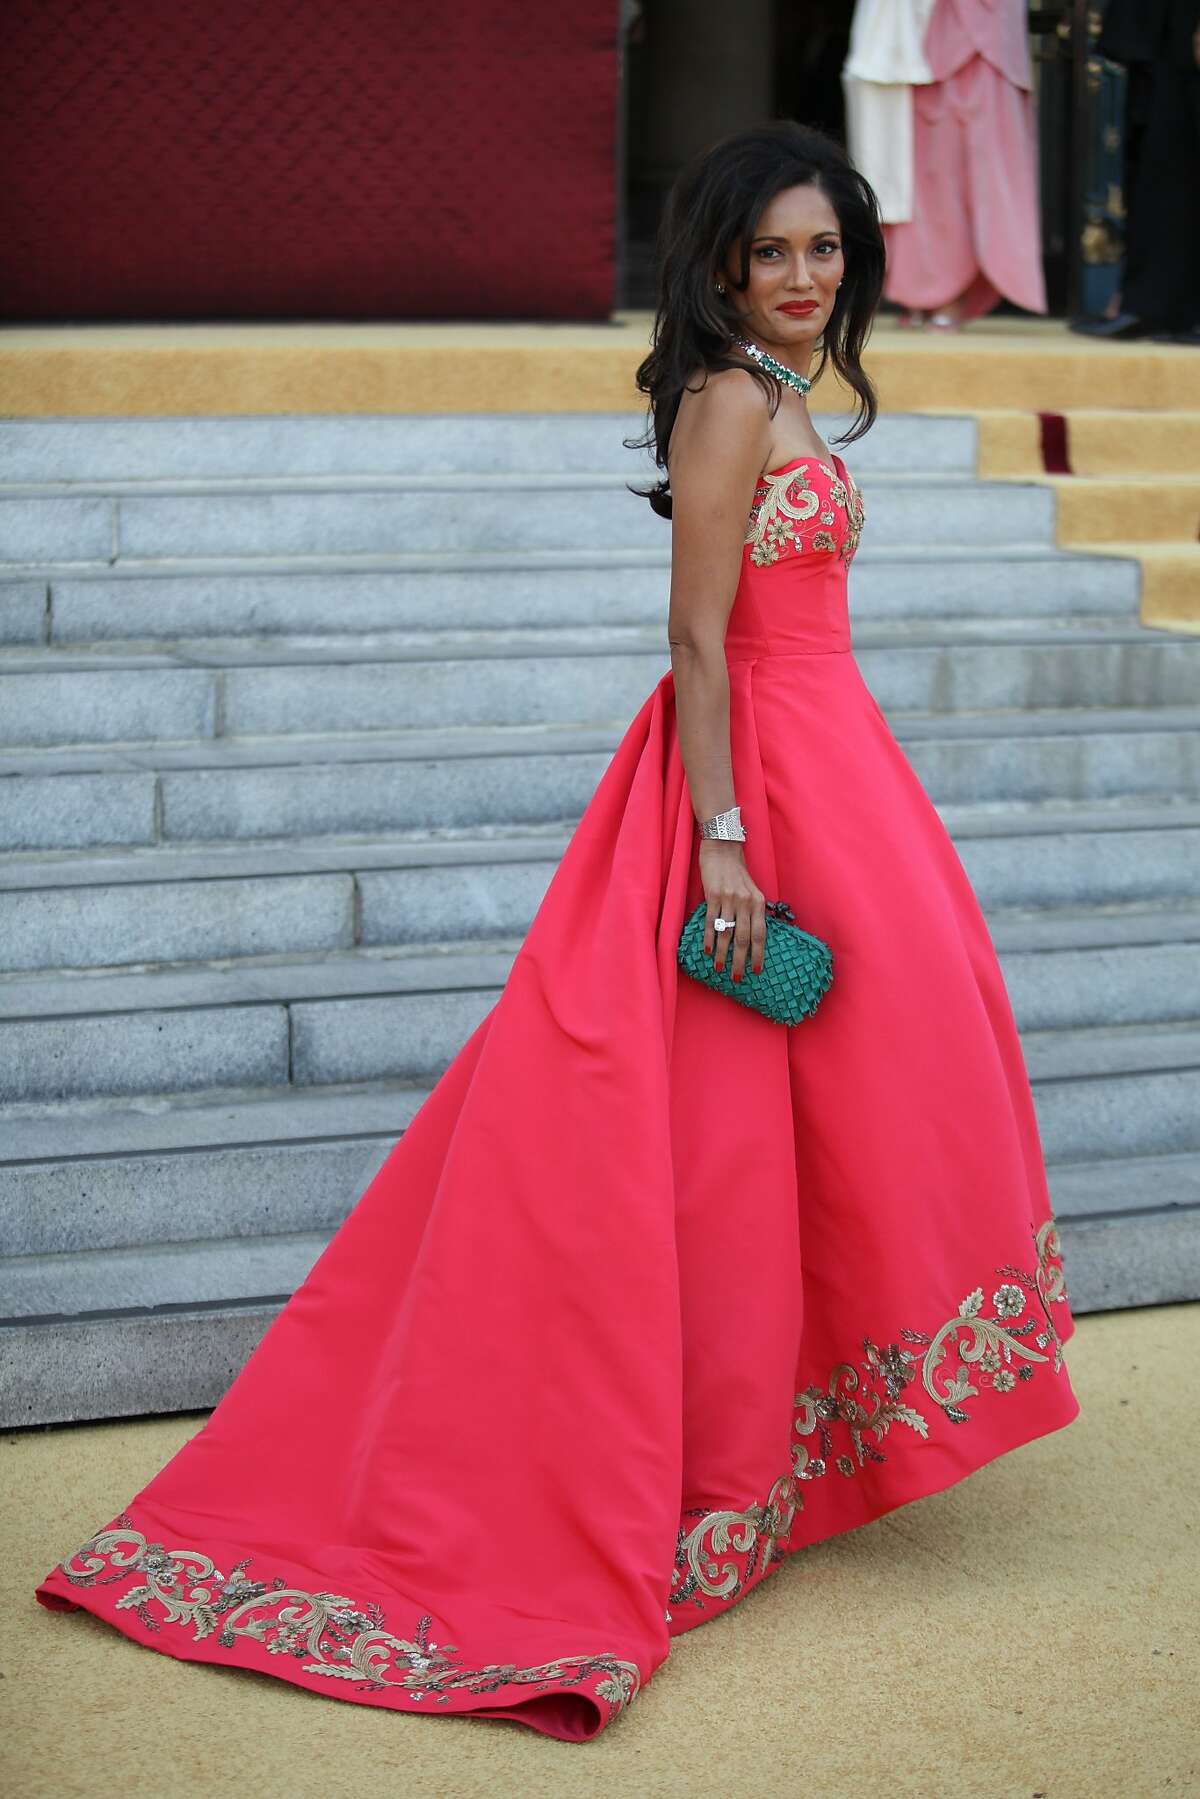 Komal Shah poses in an Oscar de la Renta gown after arriving at the San Francisco Opera's season opening ball in San Francisco Calif. on Friday, Sept. 5, 2014.